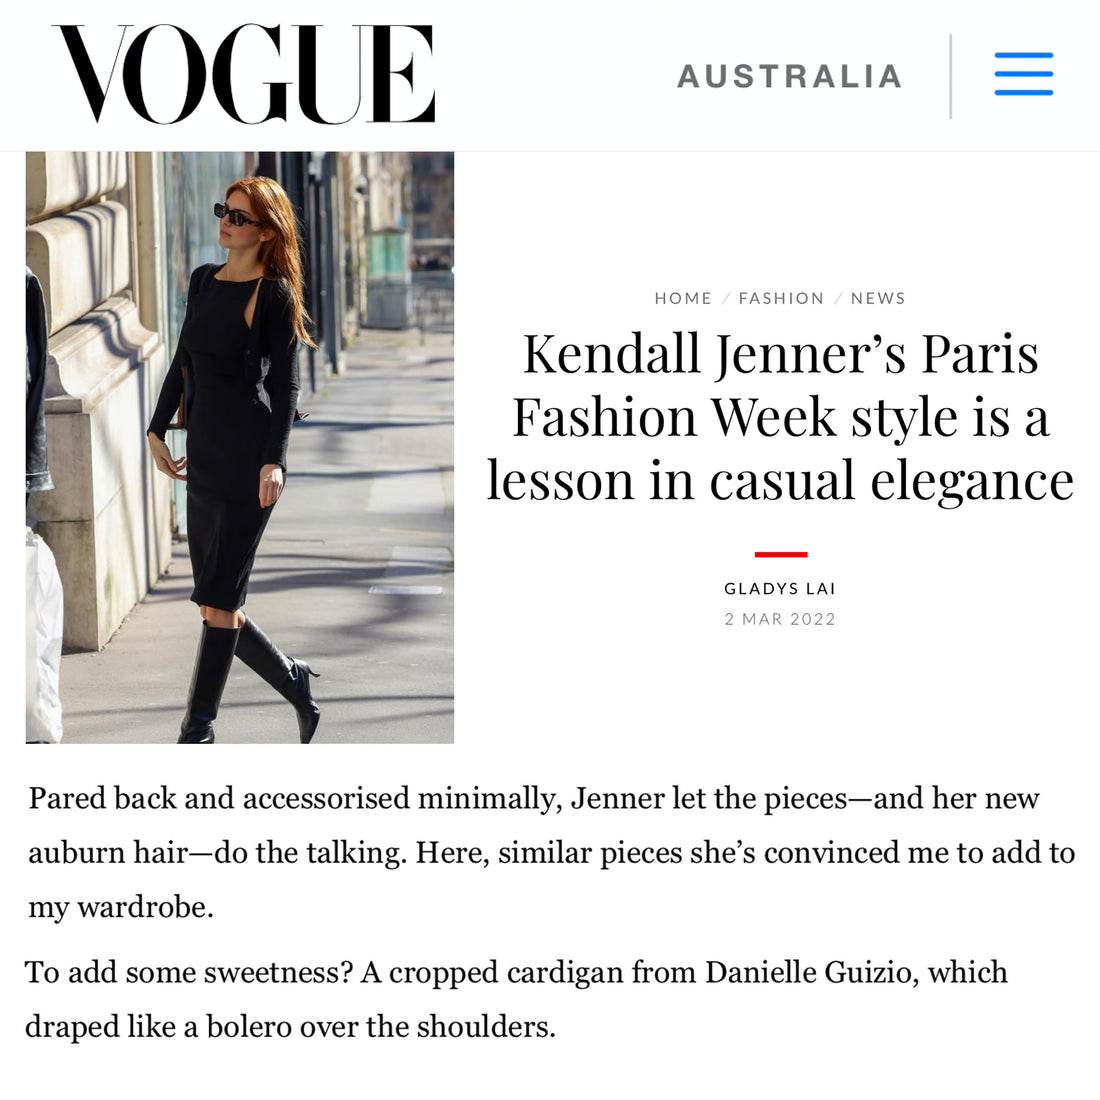 Kendall Jenner Featured in Vogue Wearing Guizio